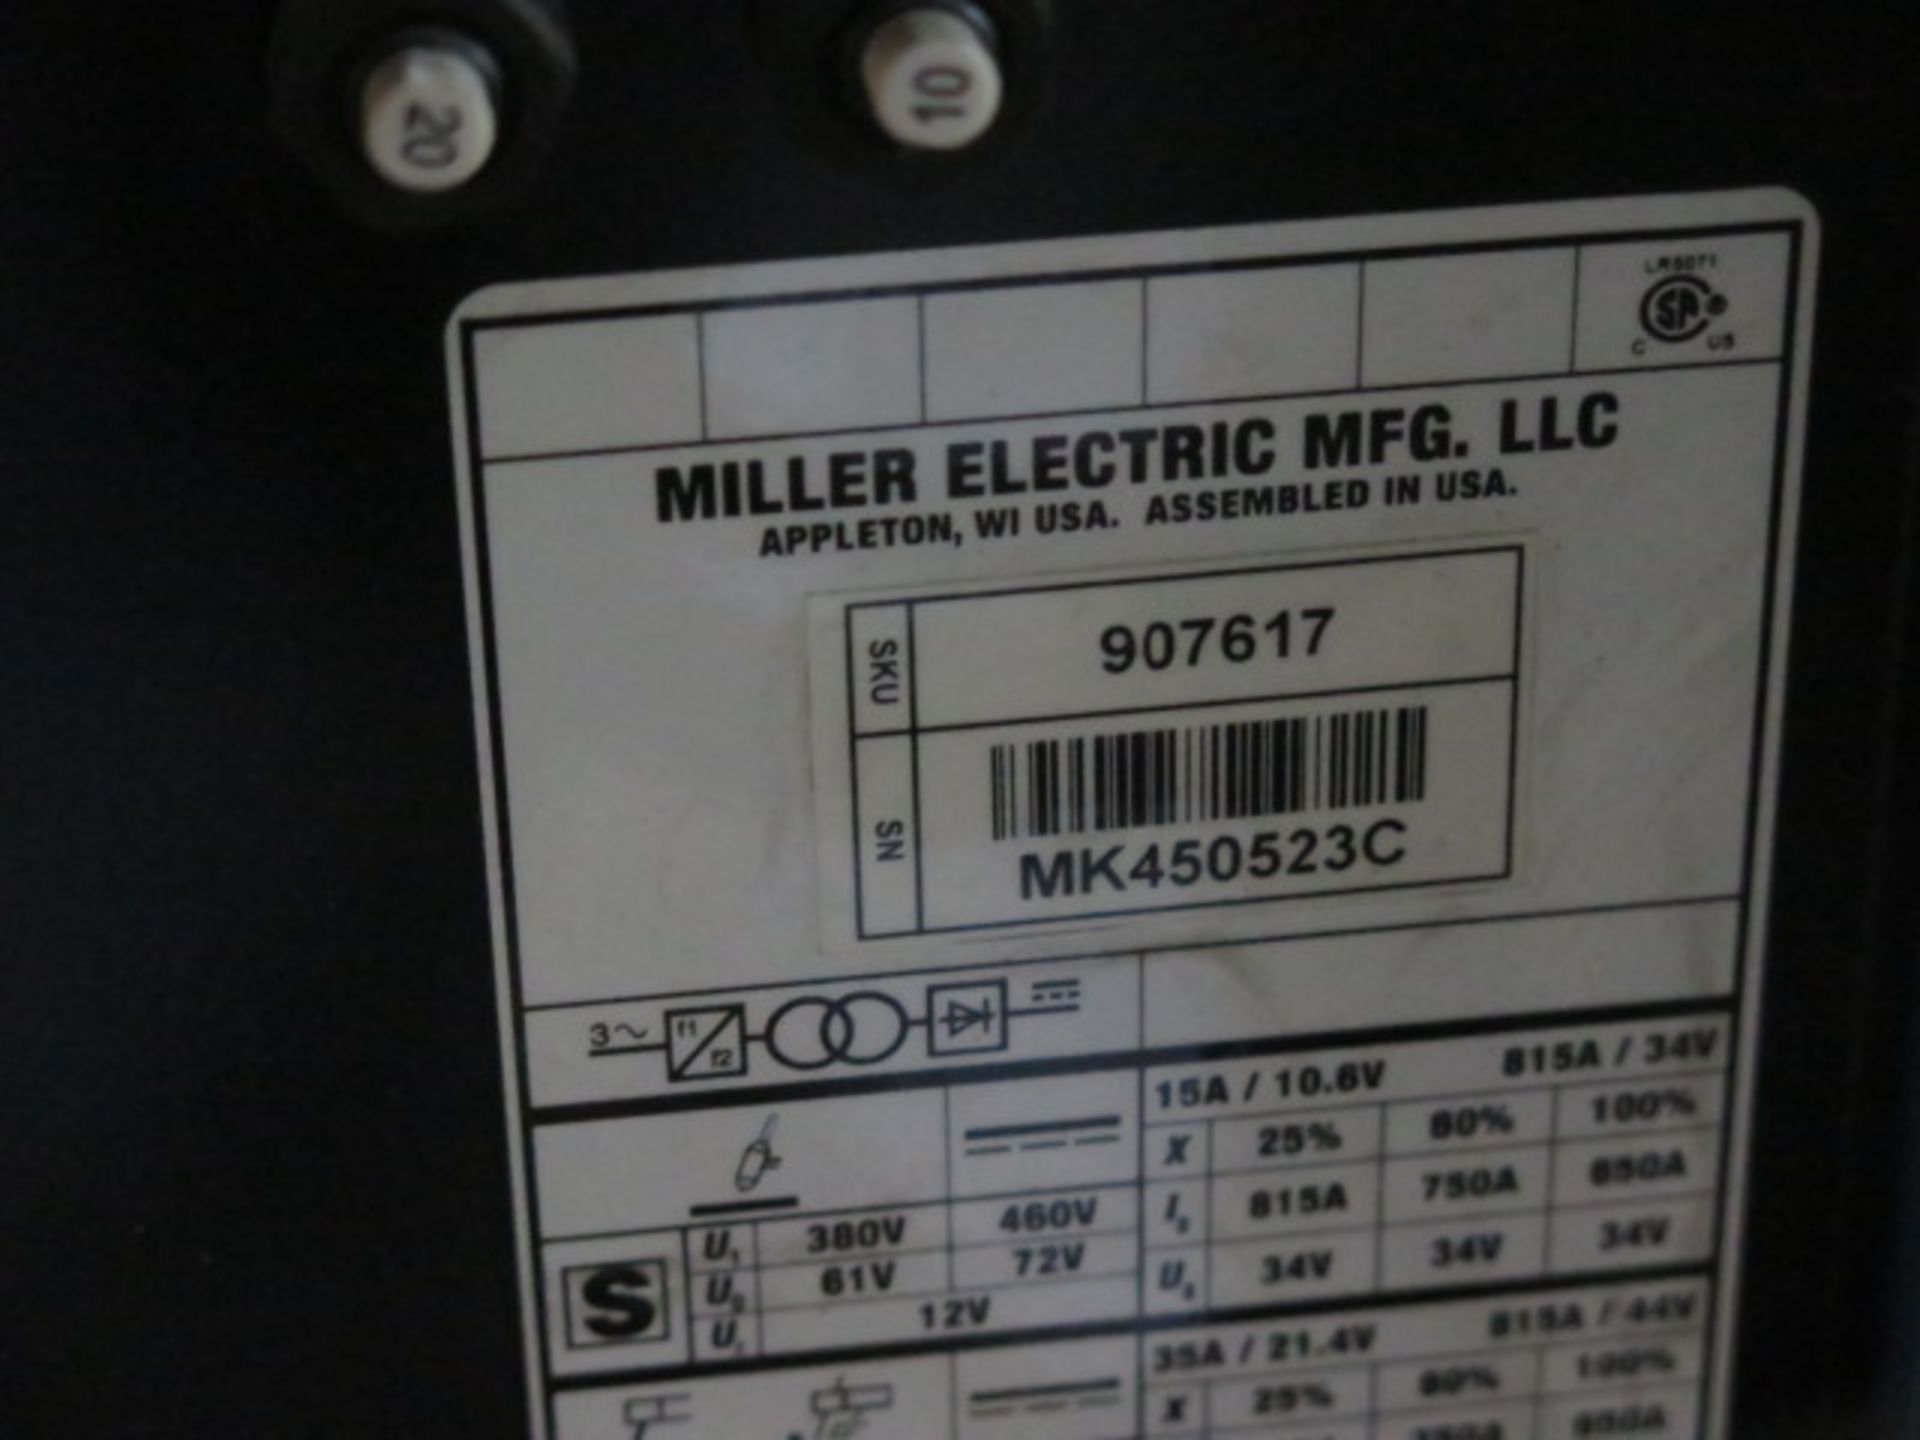 Miller Dimension 650 Arc Welding Power Source s/n MK450523C w/ Miller XR-Alumina Feed, SOLD AS IS - Image 7 of 17